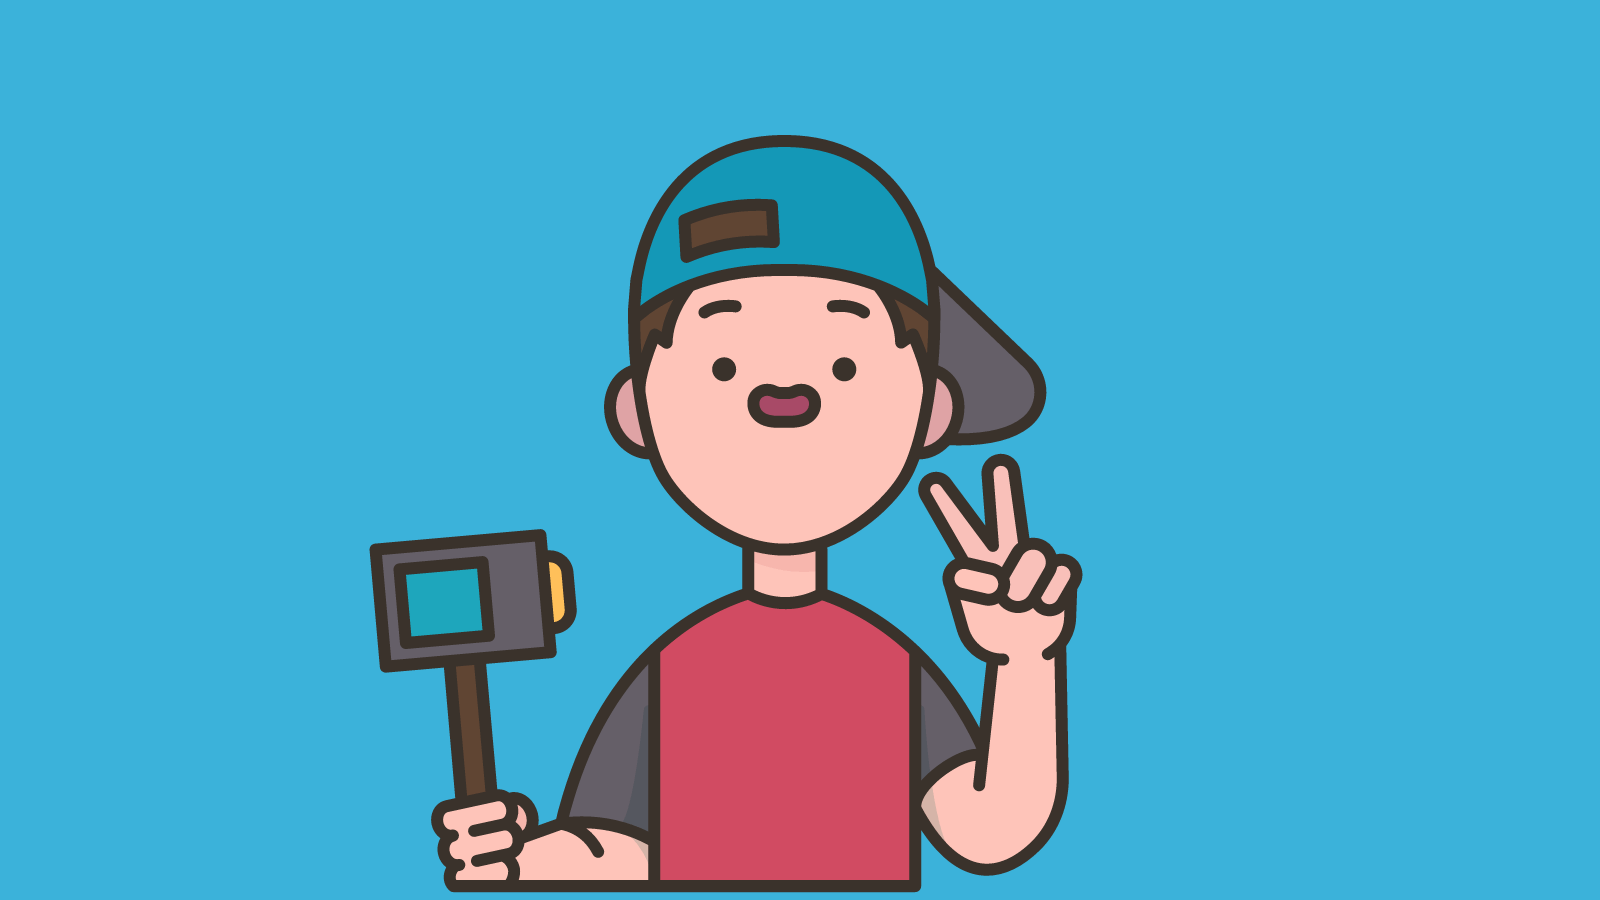 A boy in a backwards baseball cap filming himself with a selfie stick and holding up a peace sign